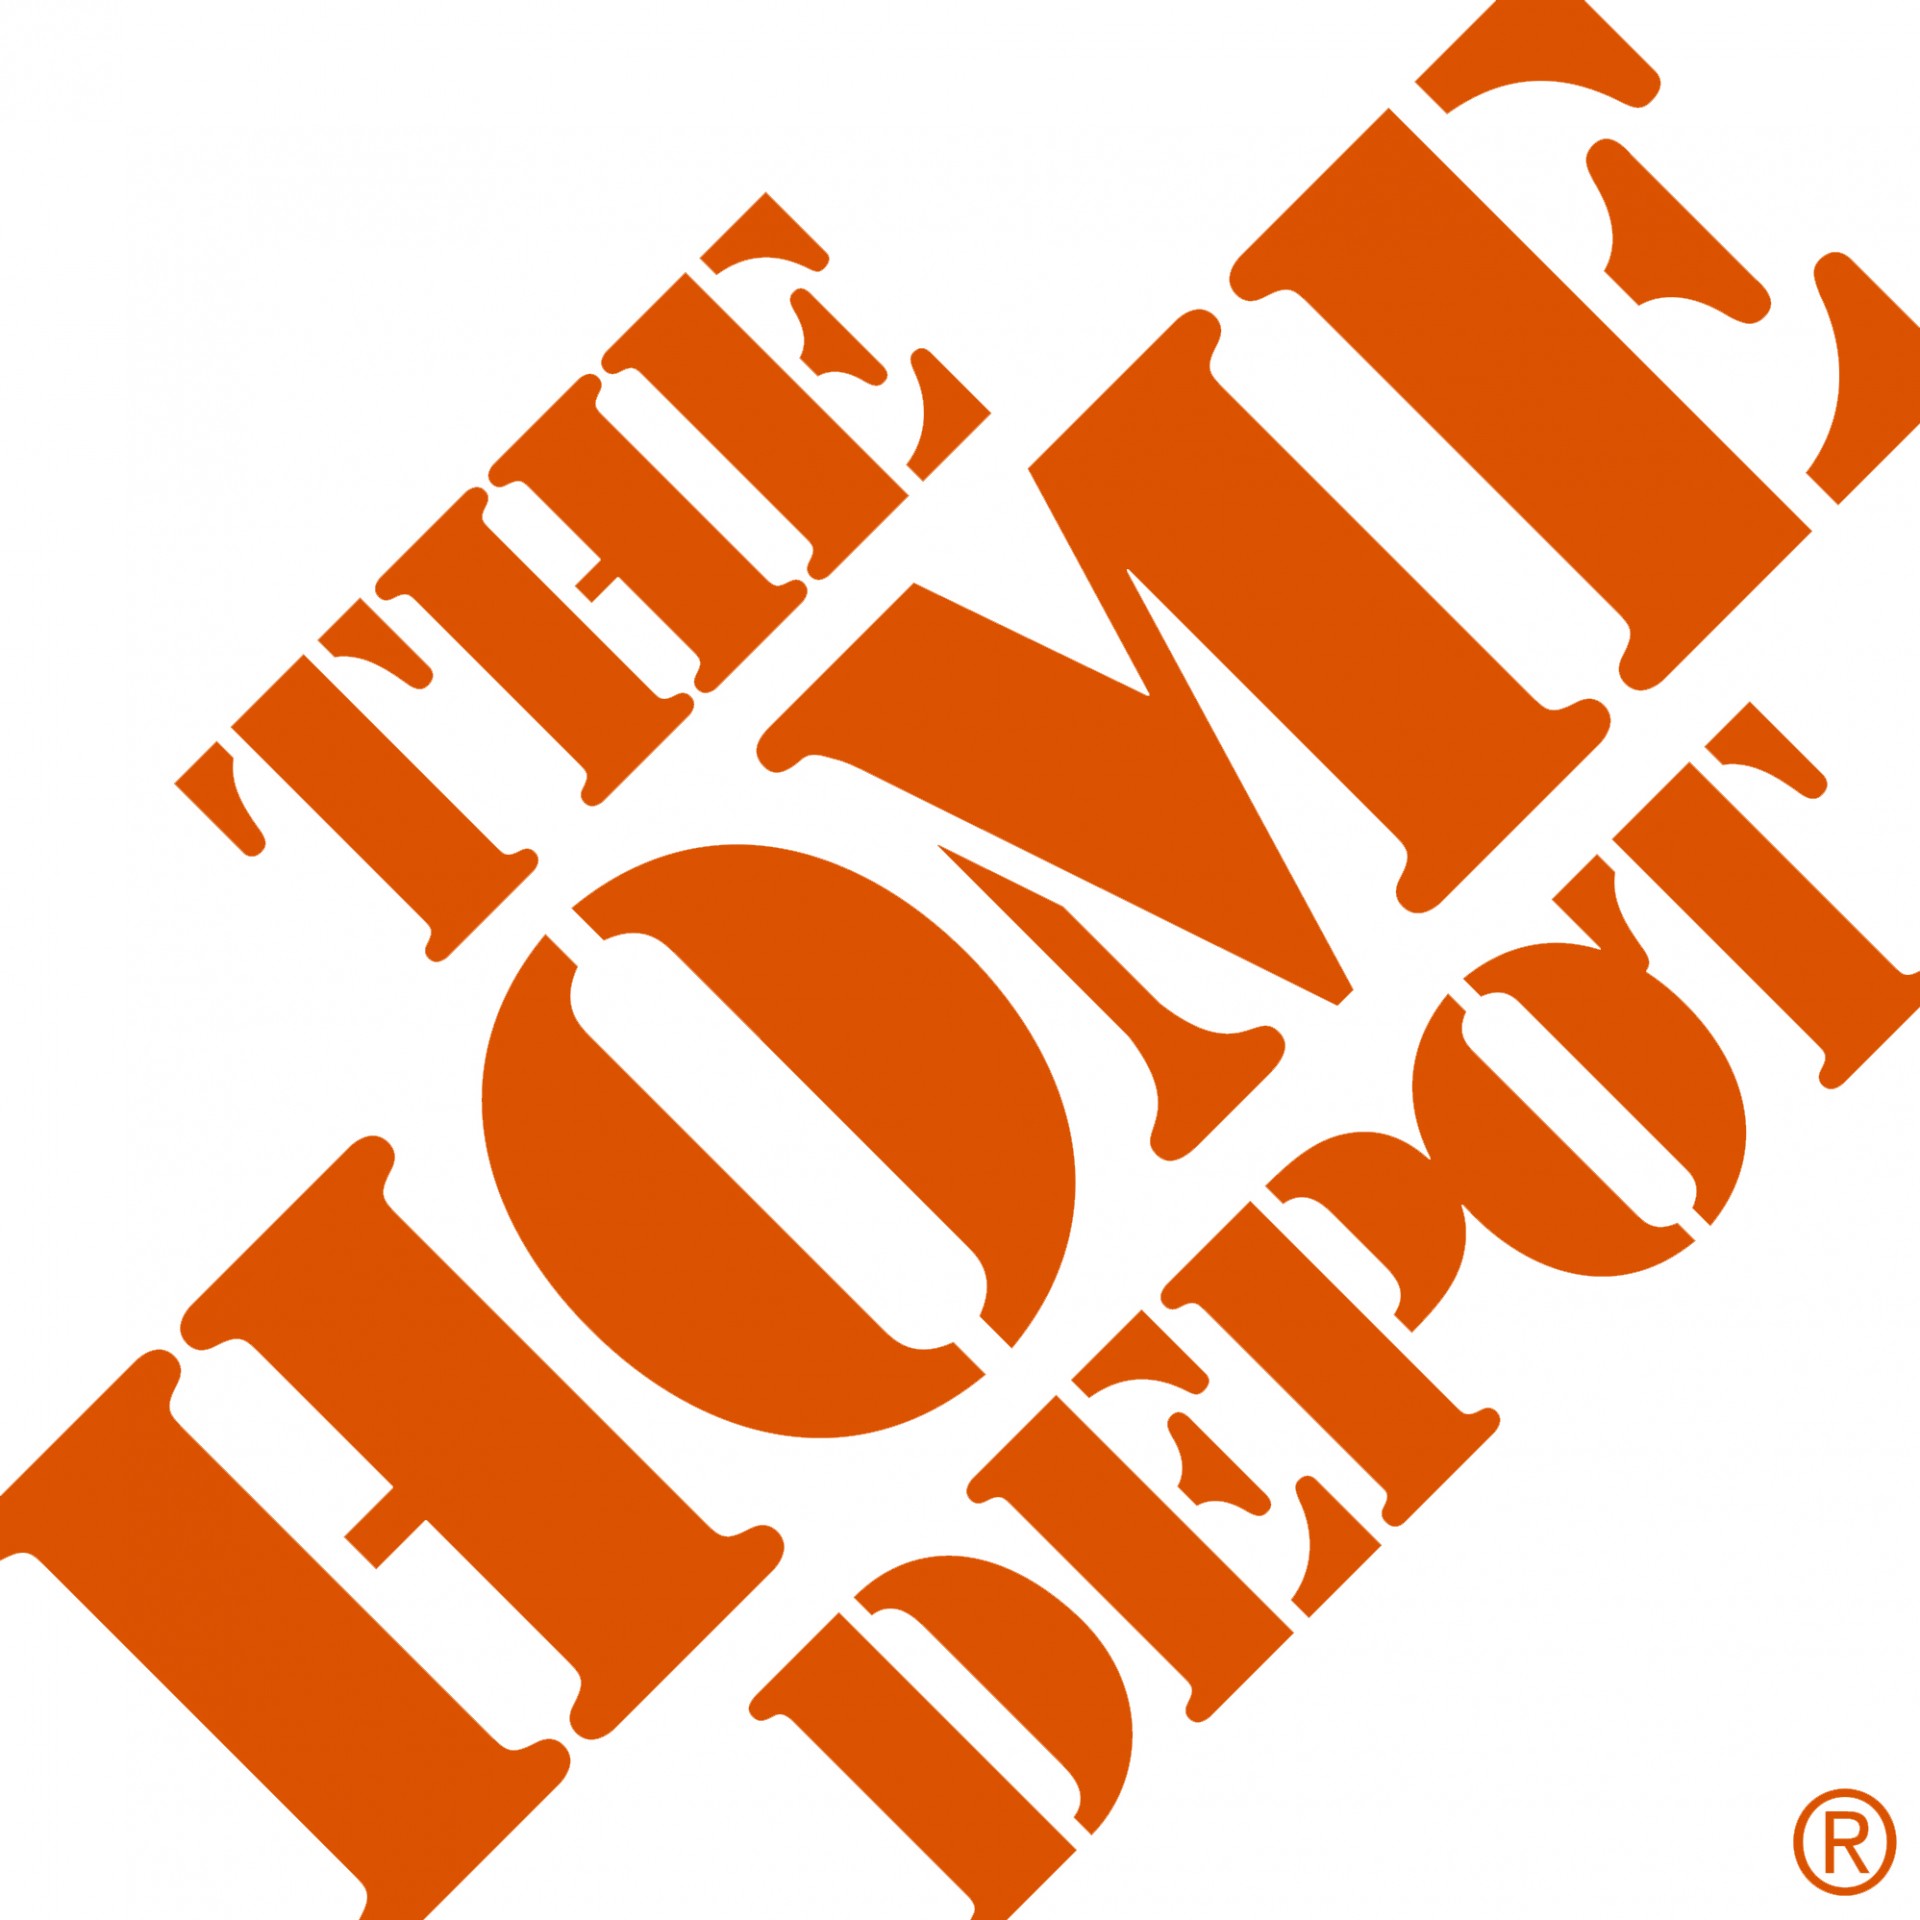 Home-Depot-Logo-Meaning-history - Metamend